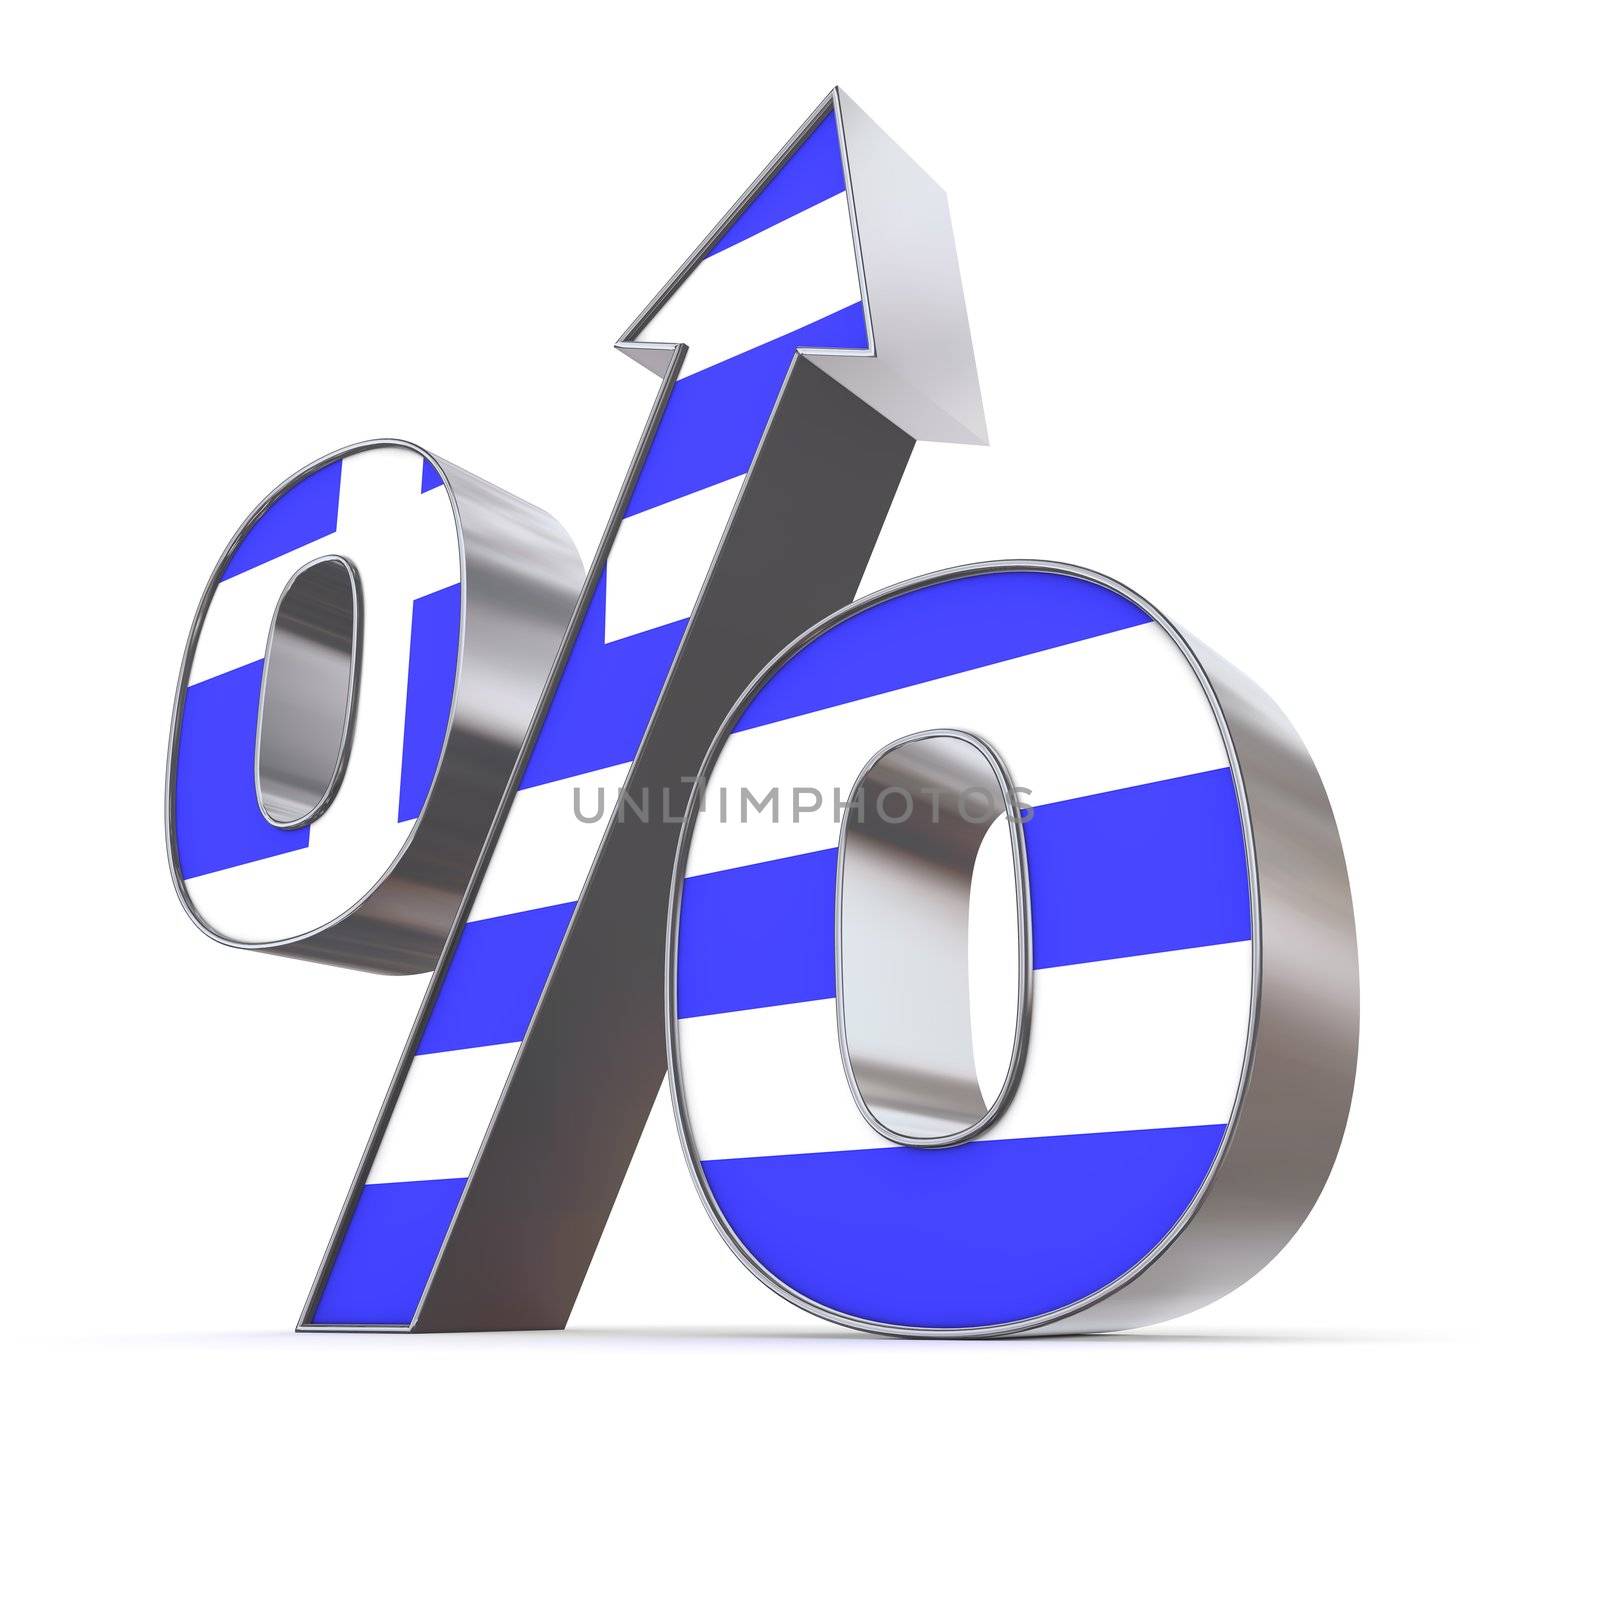 shiny metallic percentage symbol with an arrow up - front surface textured with the greek flag